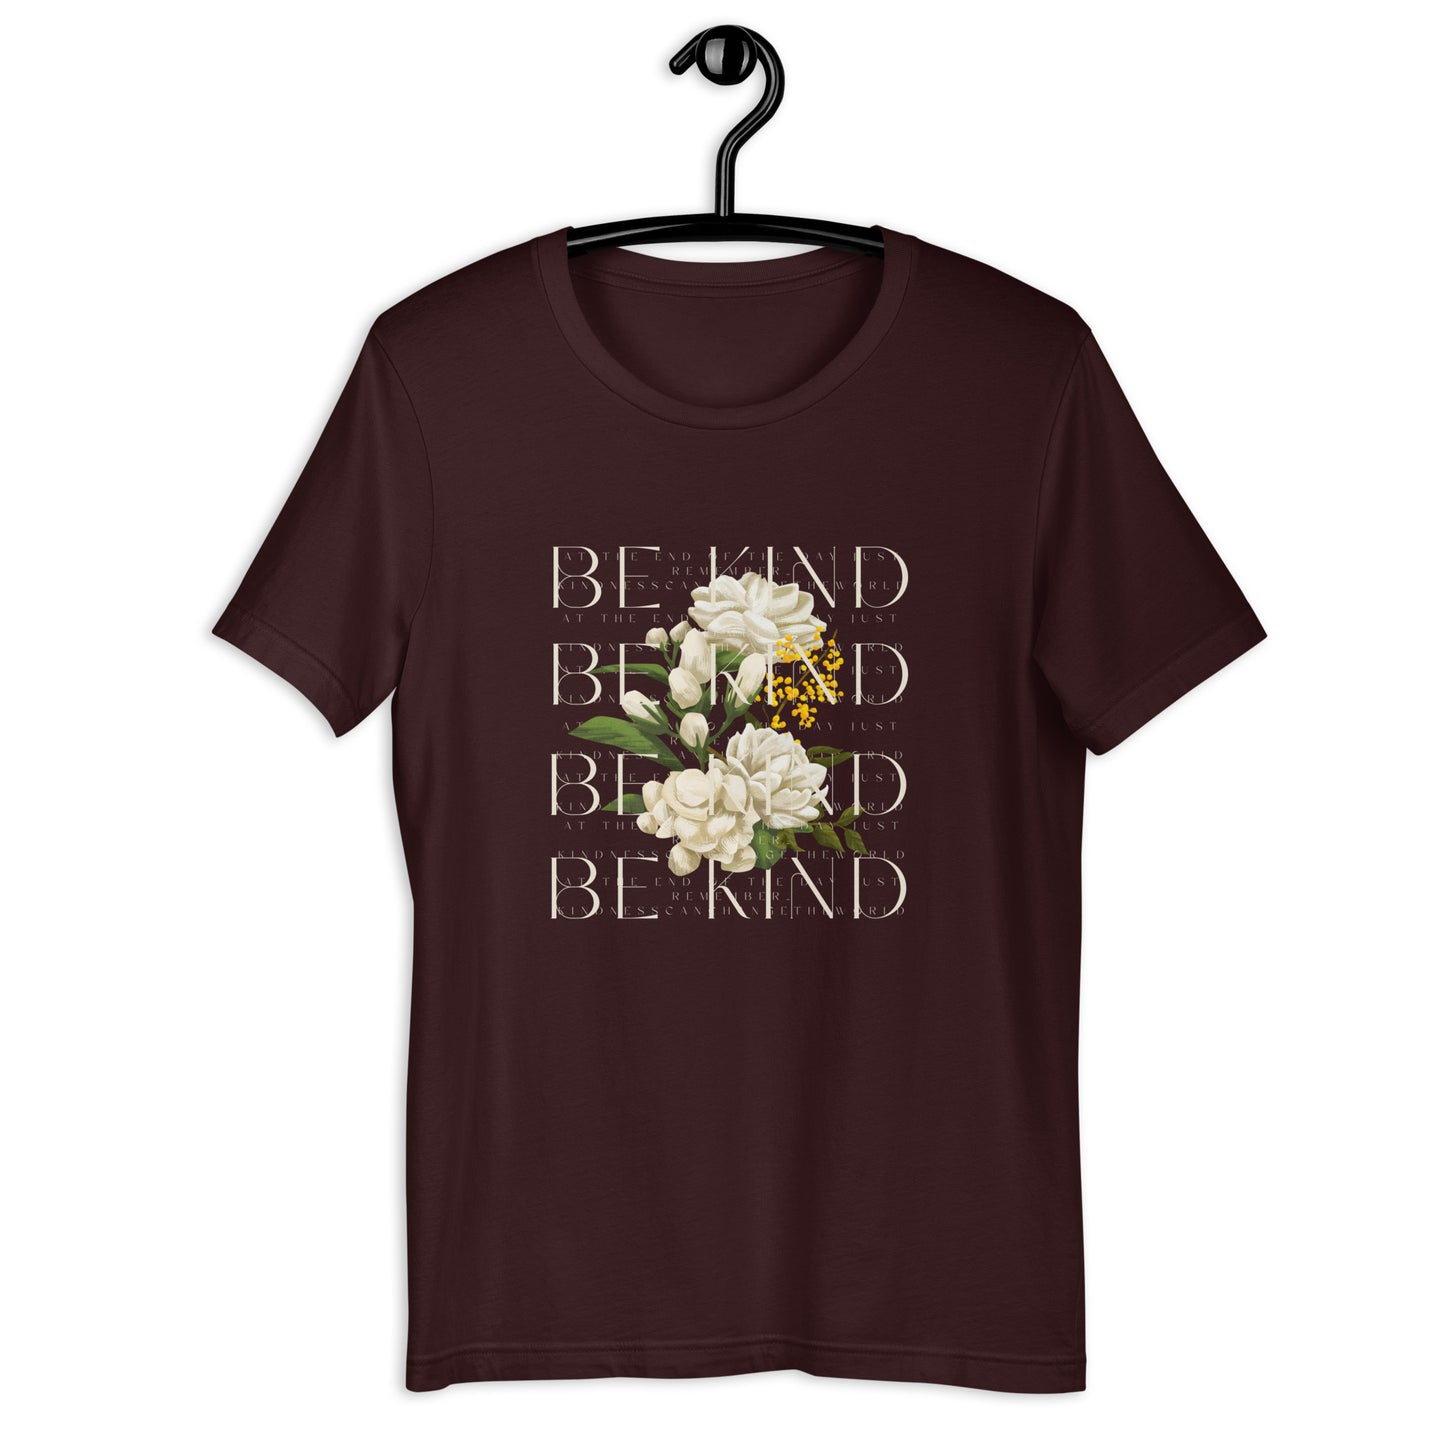 BE KIND 2 T-Shirt